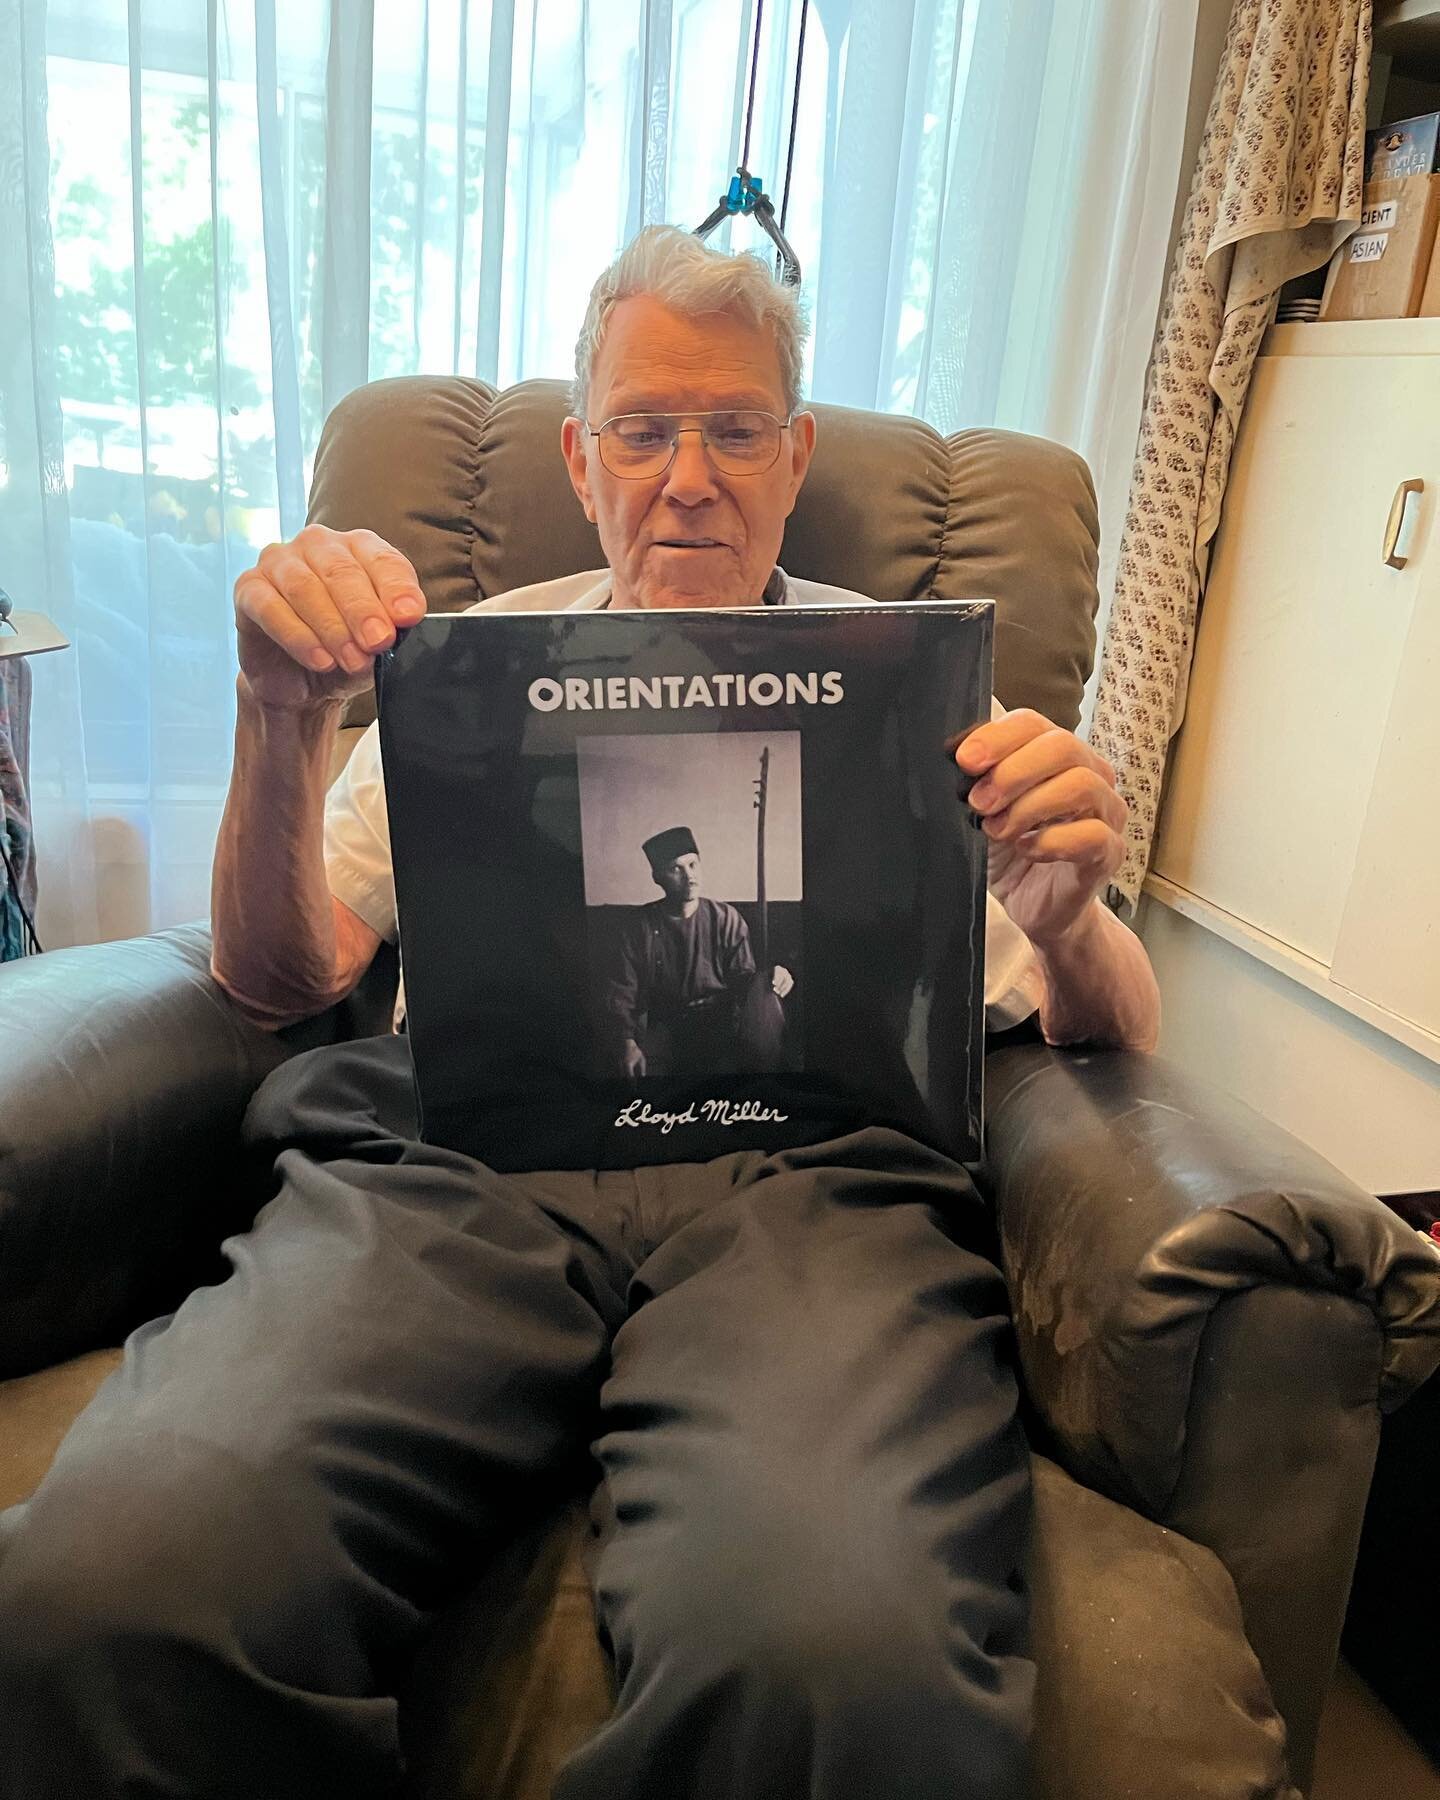 A very special day. I got to brighten up Lloyd Millers day with dropping off his new record and listening to it with him. He was so delighted and stoked on how it turned out.
Such an honor to work with him and become close friends over the last years